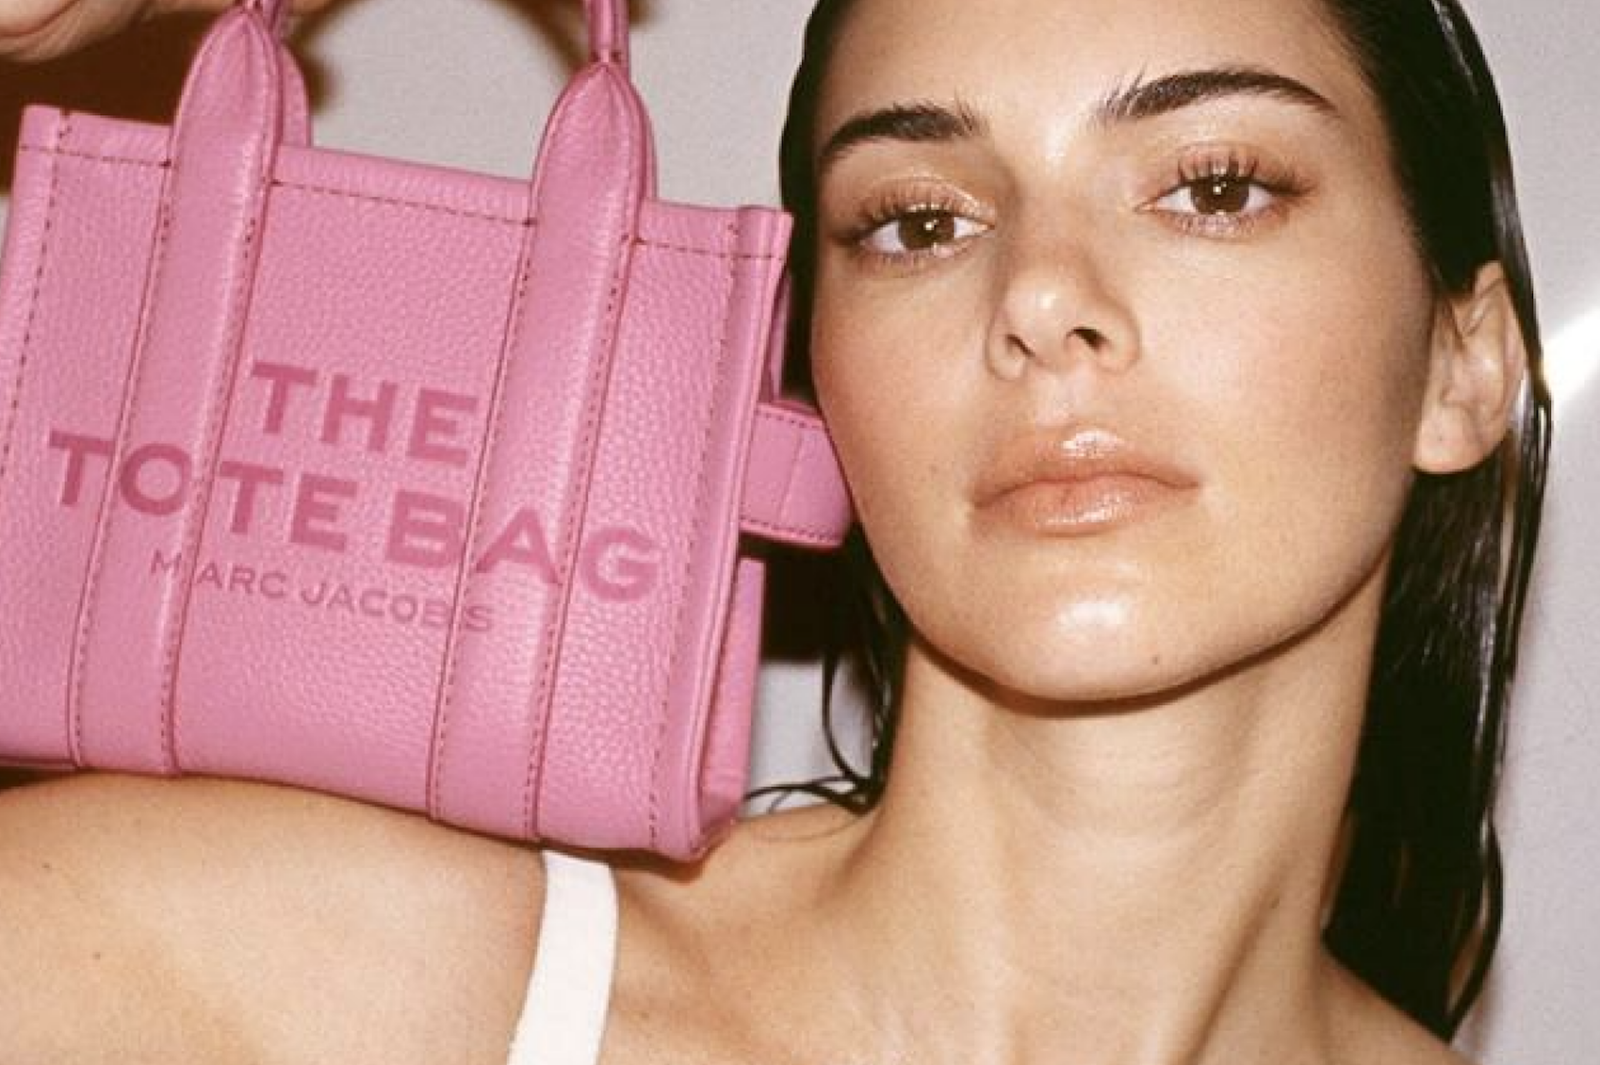 Marc Jacobs Lands on the End of Lawsuit Over its Viral TOTE BAG